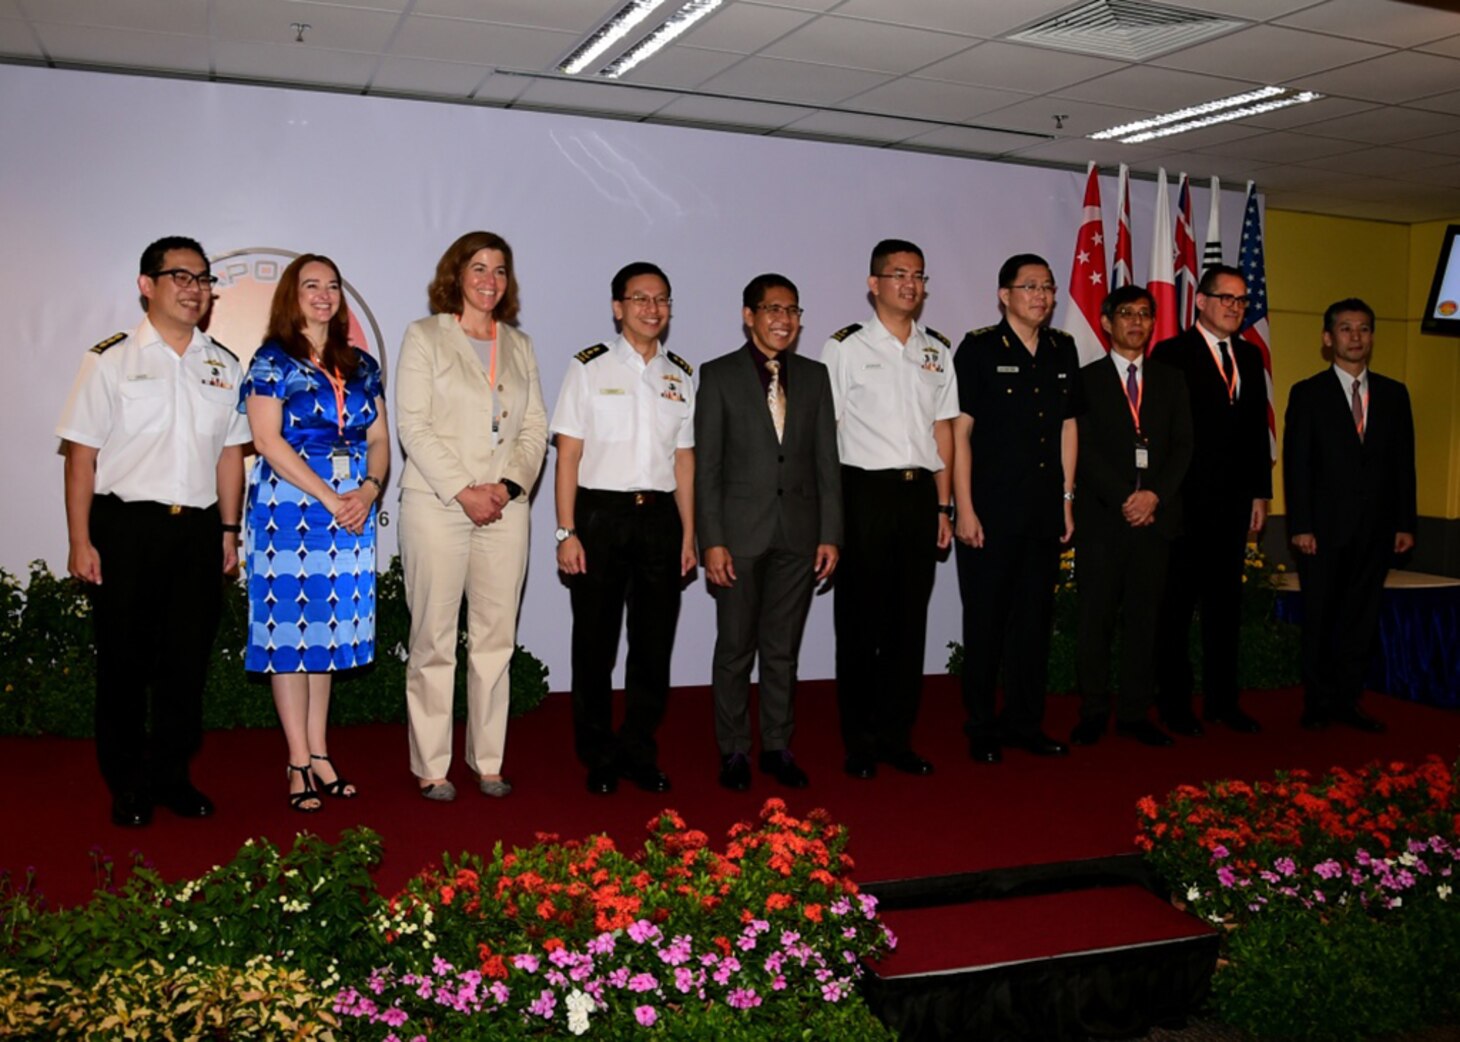 Distinguished guests stand for a group photo after the opening ceremony of Exercise Deep Sabre 2016 on Changi Naval Base Sept. 27. Part of the Proliferation Security Initiative, Exercise Deep Sabre is a multi-national maritime interdiction exercise involving some 2,000 personnel from the military, coast guard, customs and other agencies of 6 countries, including the US, Singapore, Australia, Japan, New Zealand, and South Korea. 